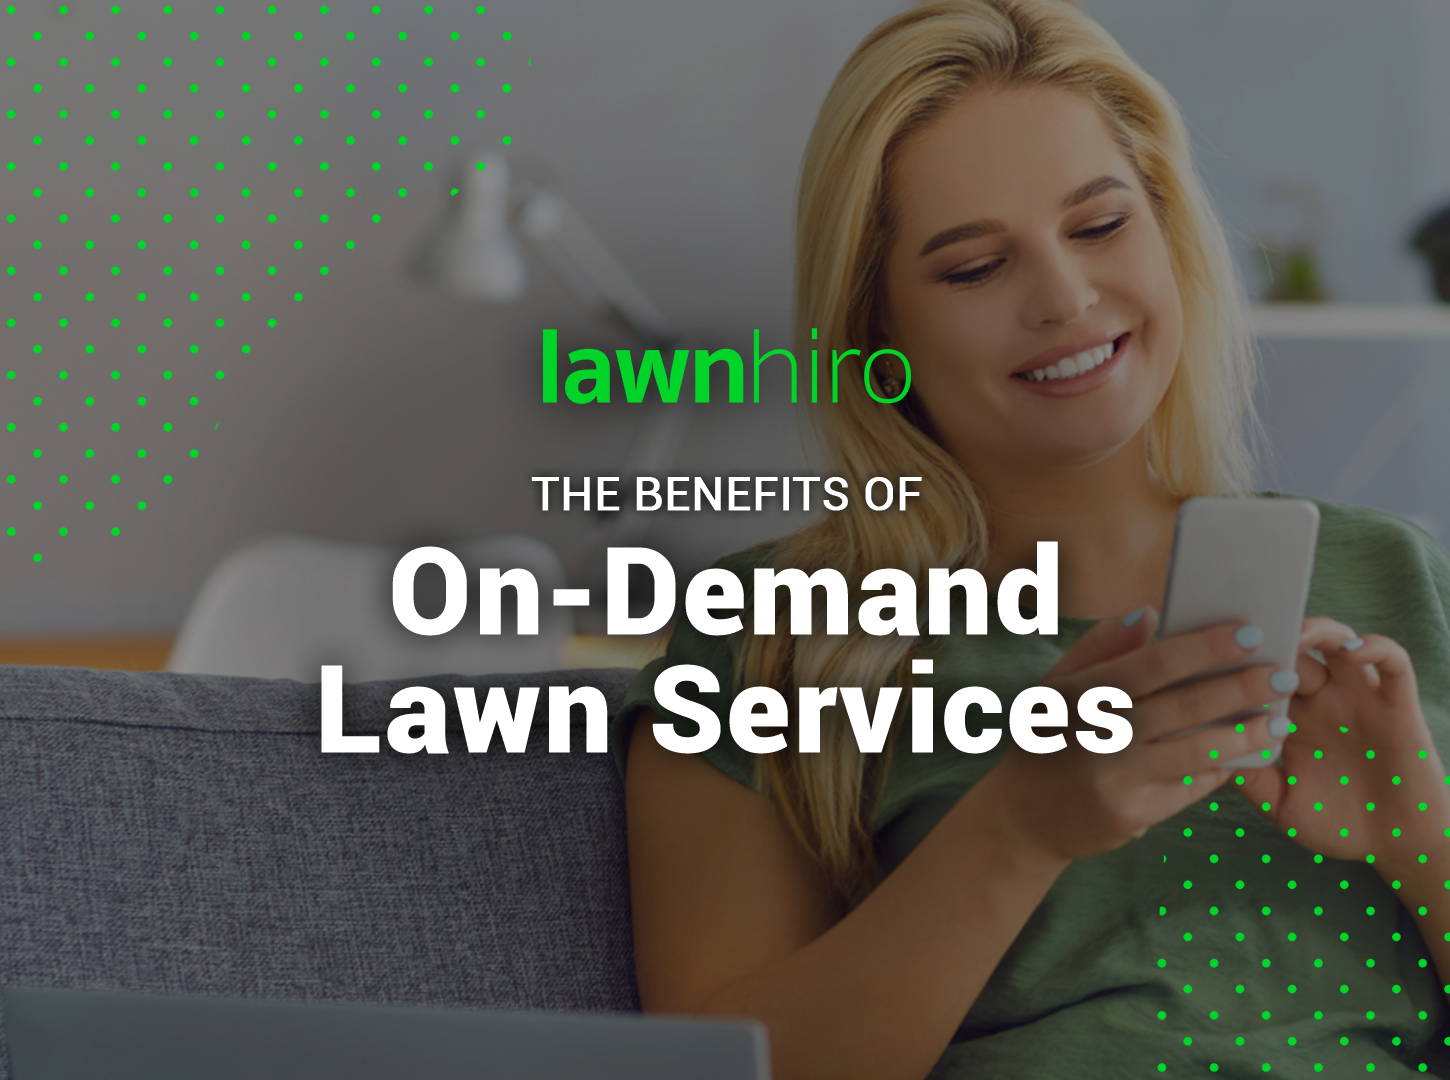 The Benefits of On-Demand Lawn Services - Lawnhiro